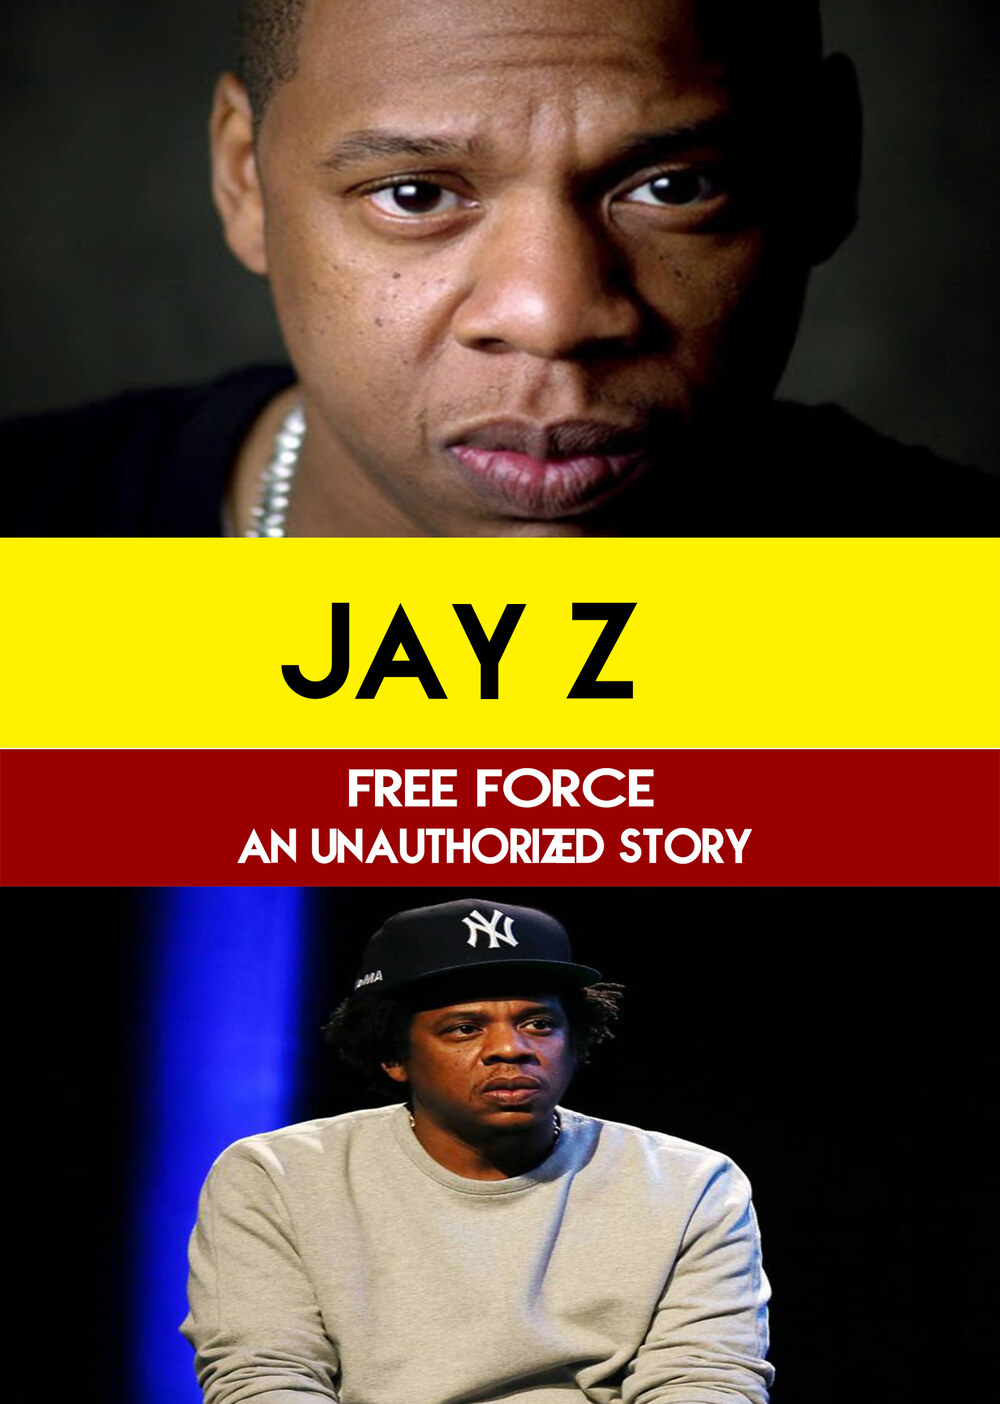 L7848 - Jay Z - Free Force An Unauthorized Story